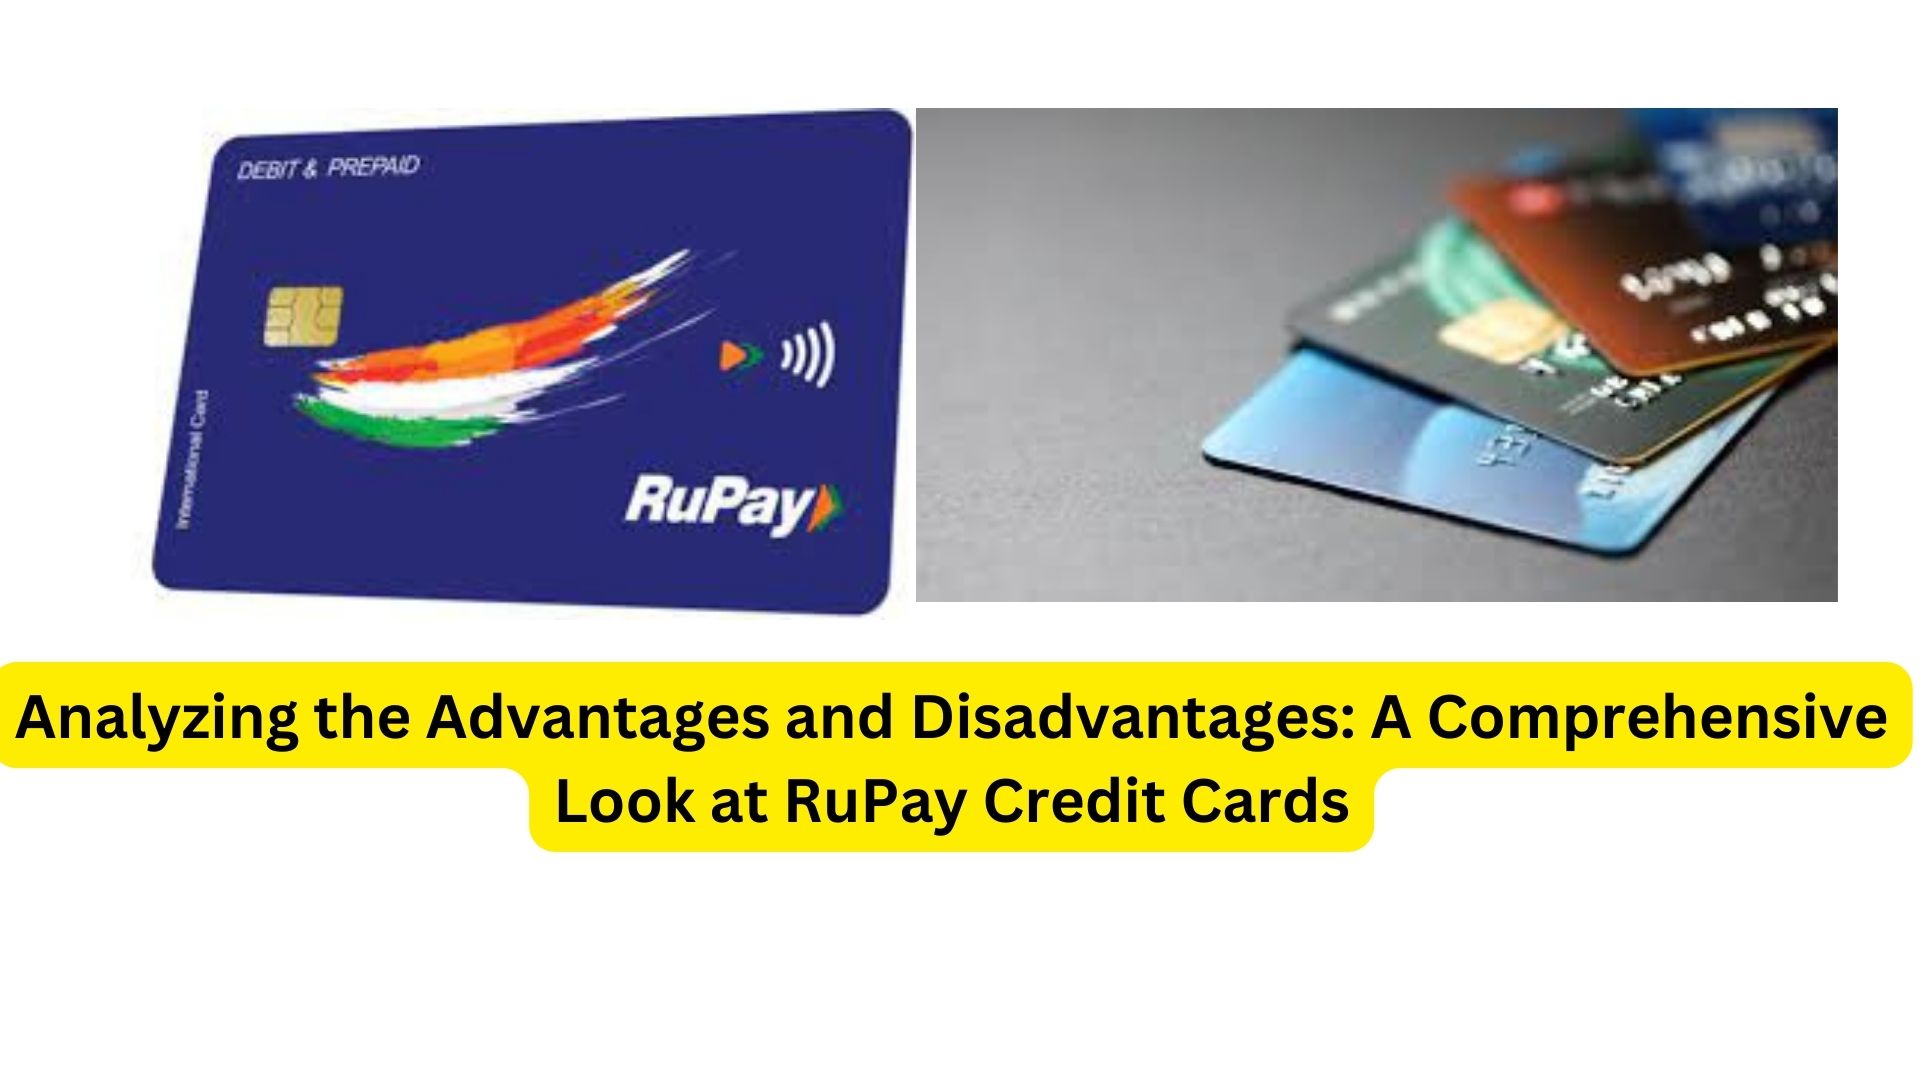 Analyzing the Advantages and Disadvantages: A Comprehensive Look at RuPay Credit Cards